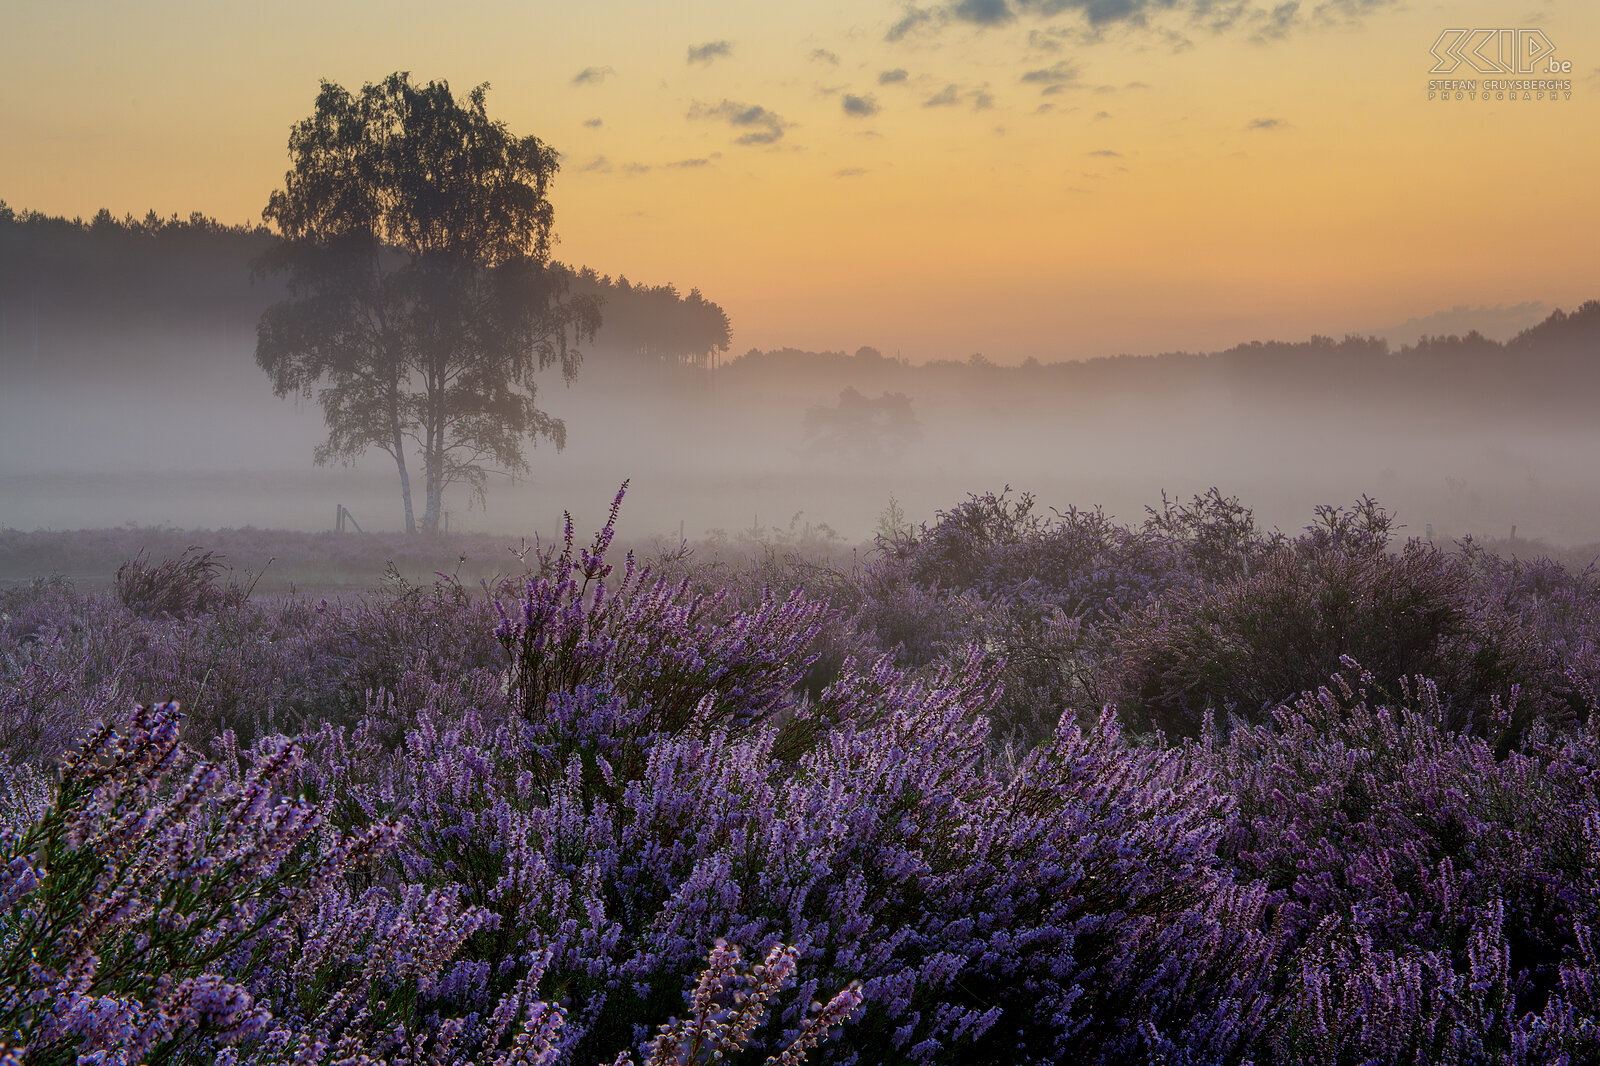 Sunrise at the heathlands - De Teut The end of August is always a good time for landscape photographers. In the morning there is often atmospheric fog and the heather is in full bloom in our regions. This is a small selection of photos of sunrises on the flowering heathlands. A few photos are made this year in the beautiful nature reserve the Teut in Zonhoven. The other images  are from past years in Gerhagen (Tessenderlo), Veerle heide(Veerle-Laakdal), Averbode heide (Scherpenheuvel), 's Hertogenheide (Aarschot) and Blekerheide (Lommel). Stefan Cruysberghs